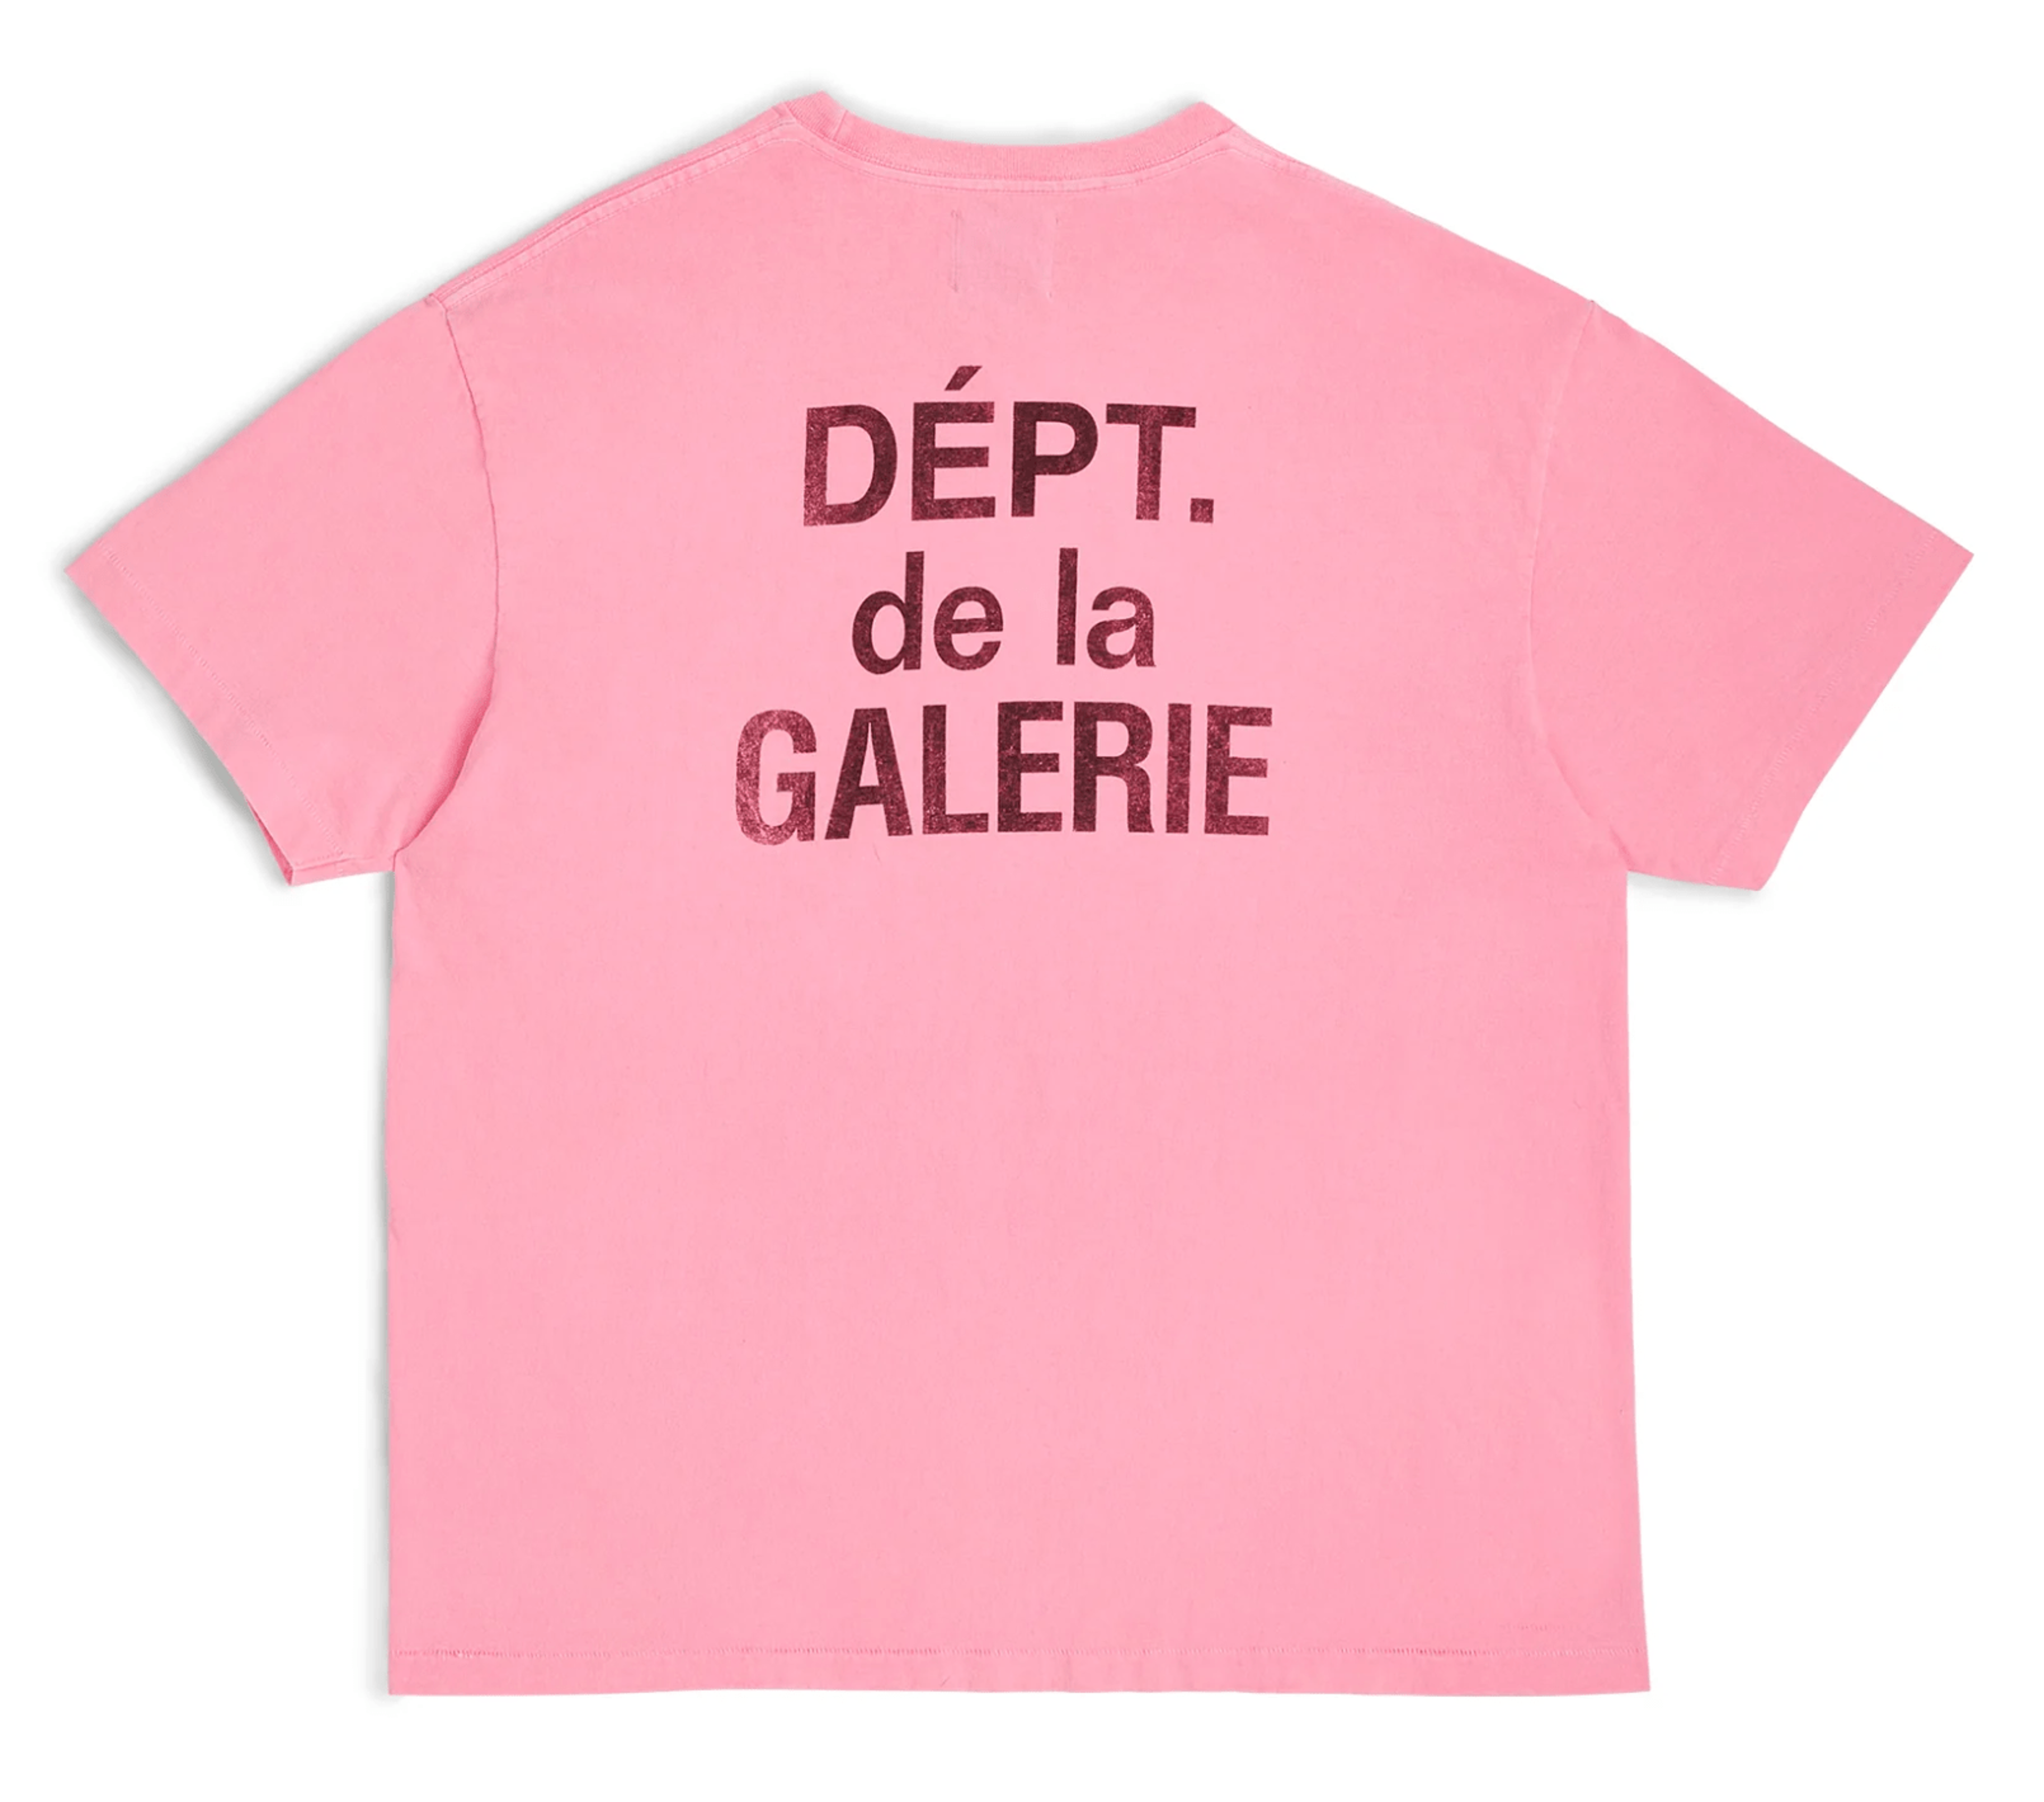 Gallery Department French Logo Short Sleeve Tee Shirt Flo Pink